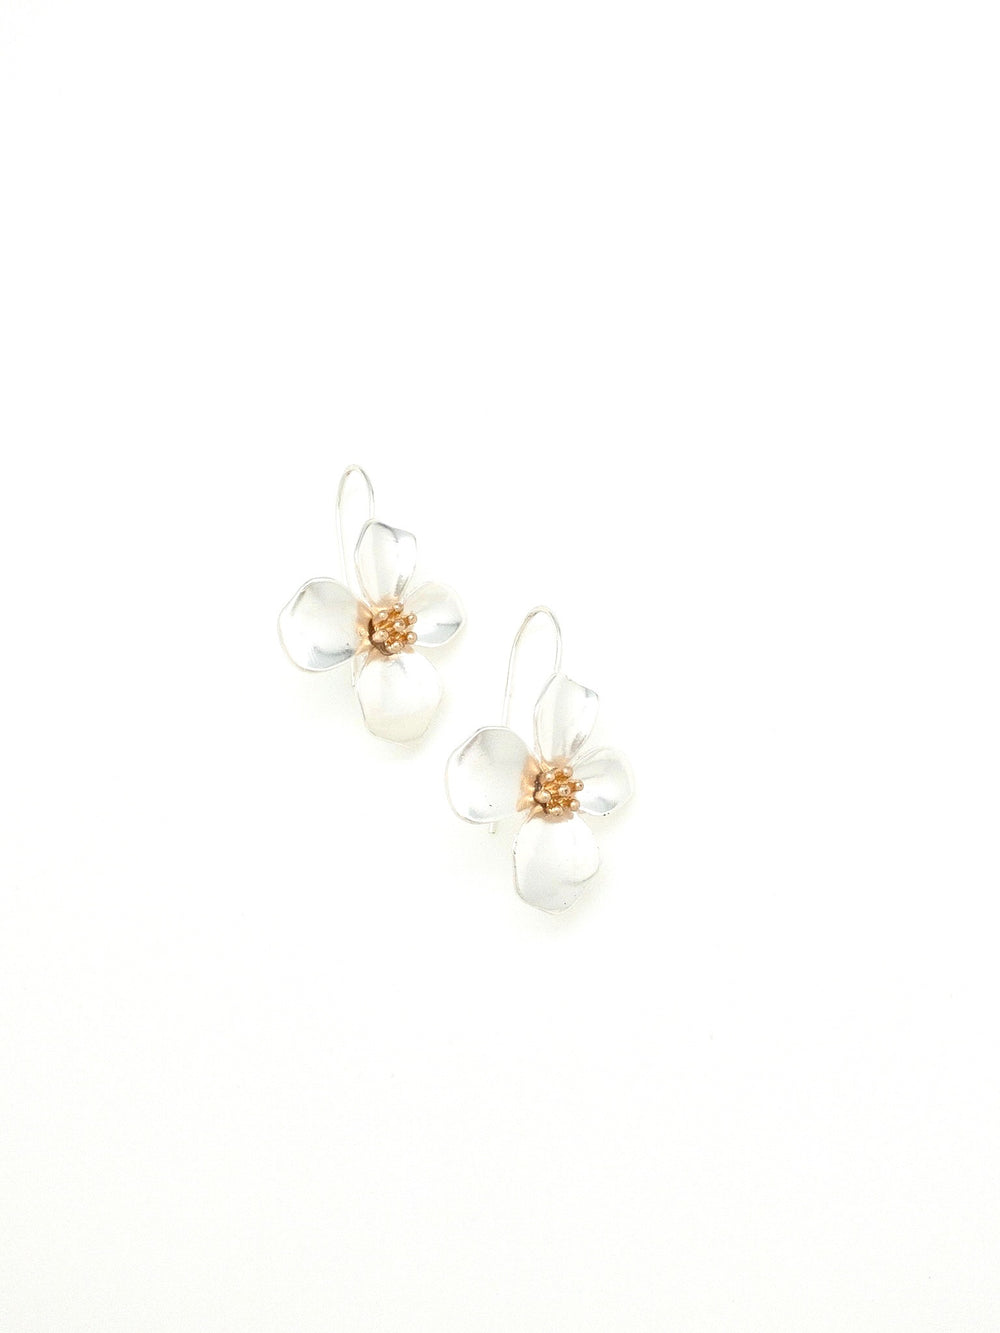 silver magnolia flowers with a gold center 